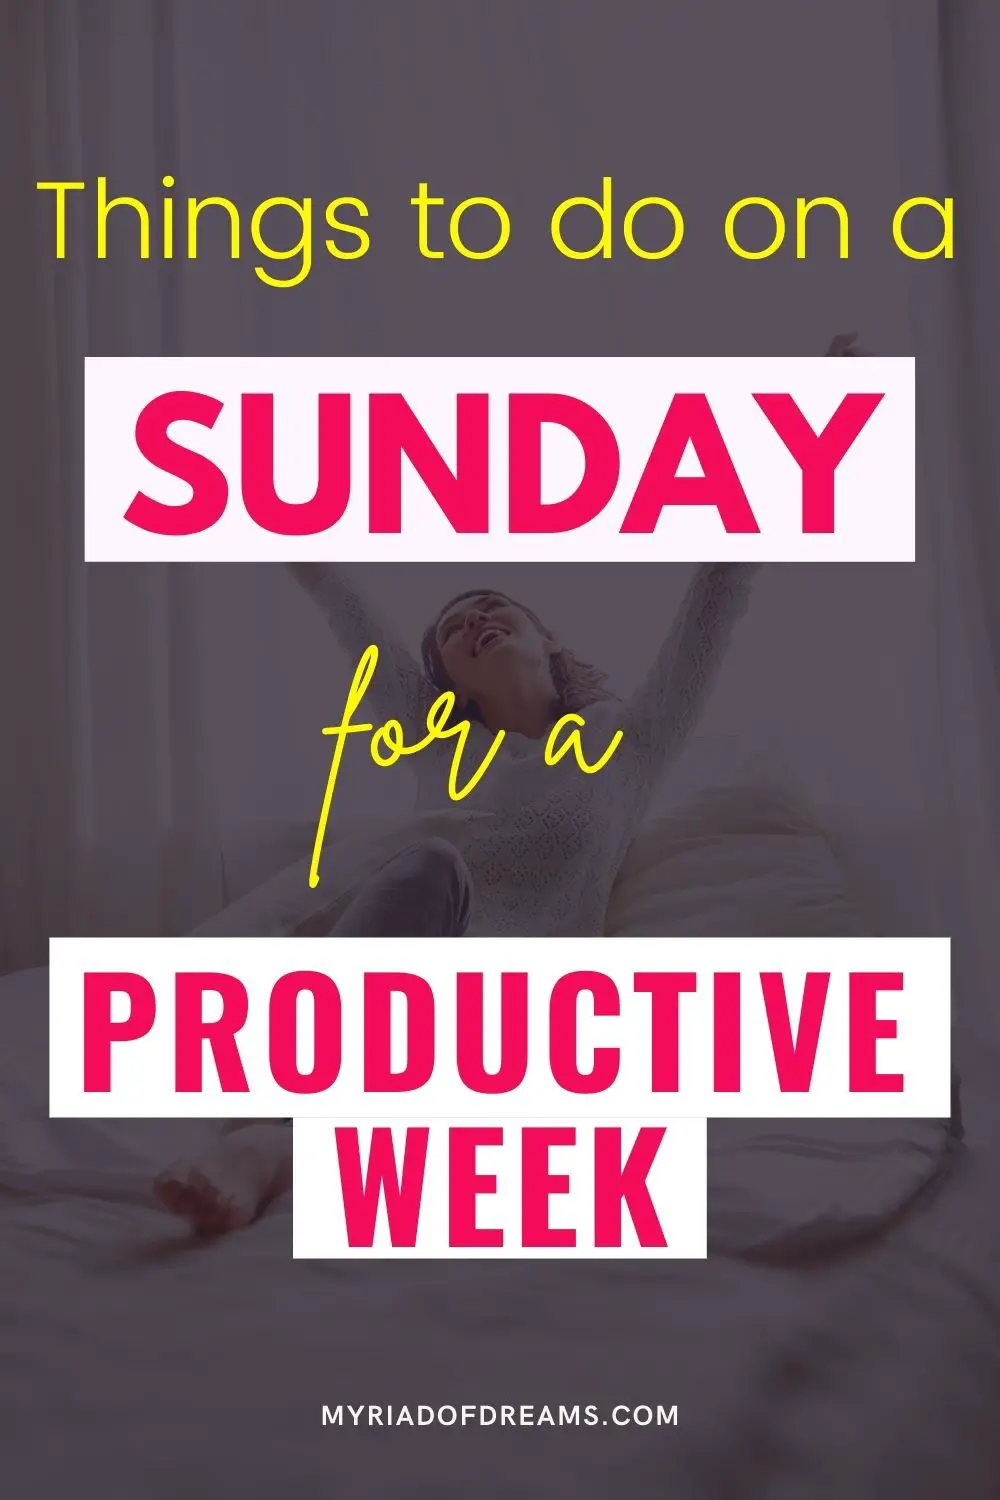 Things to do on Sunday for a better week. Try these Sunday habits for a productive week.